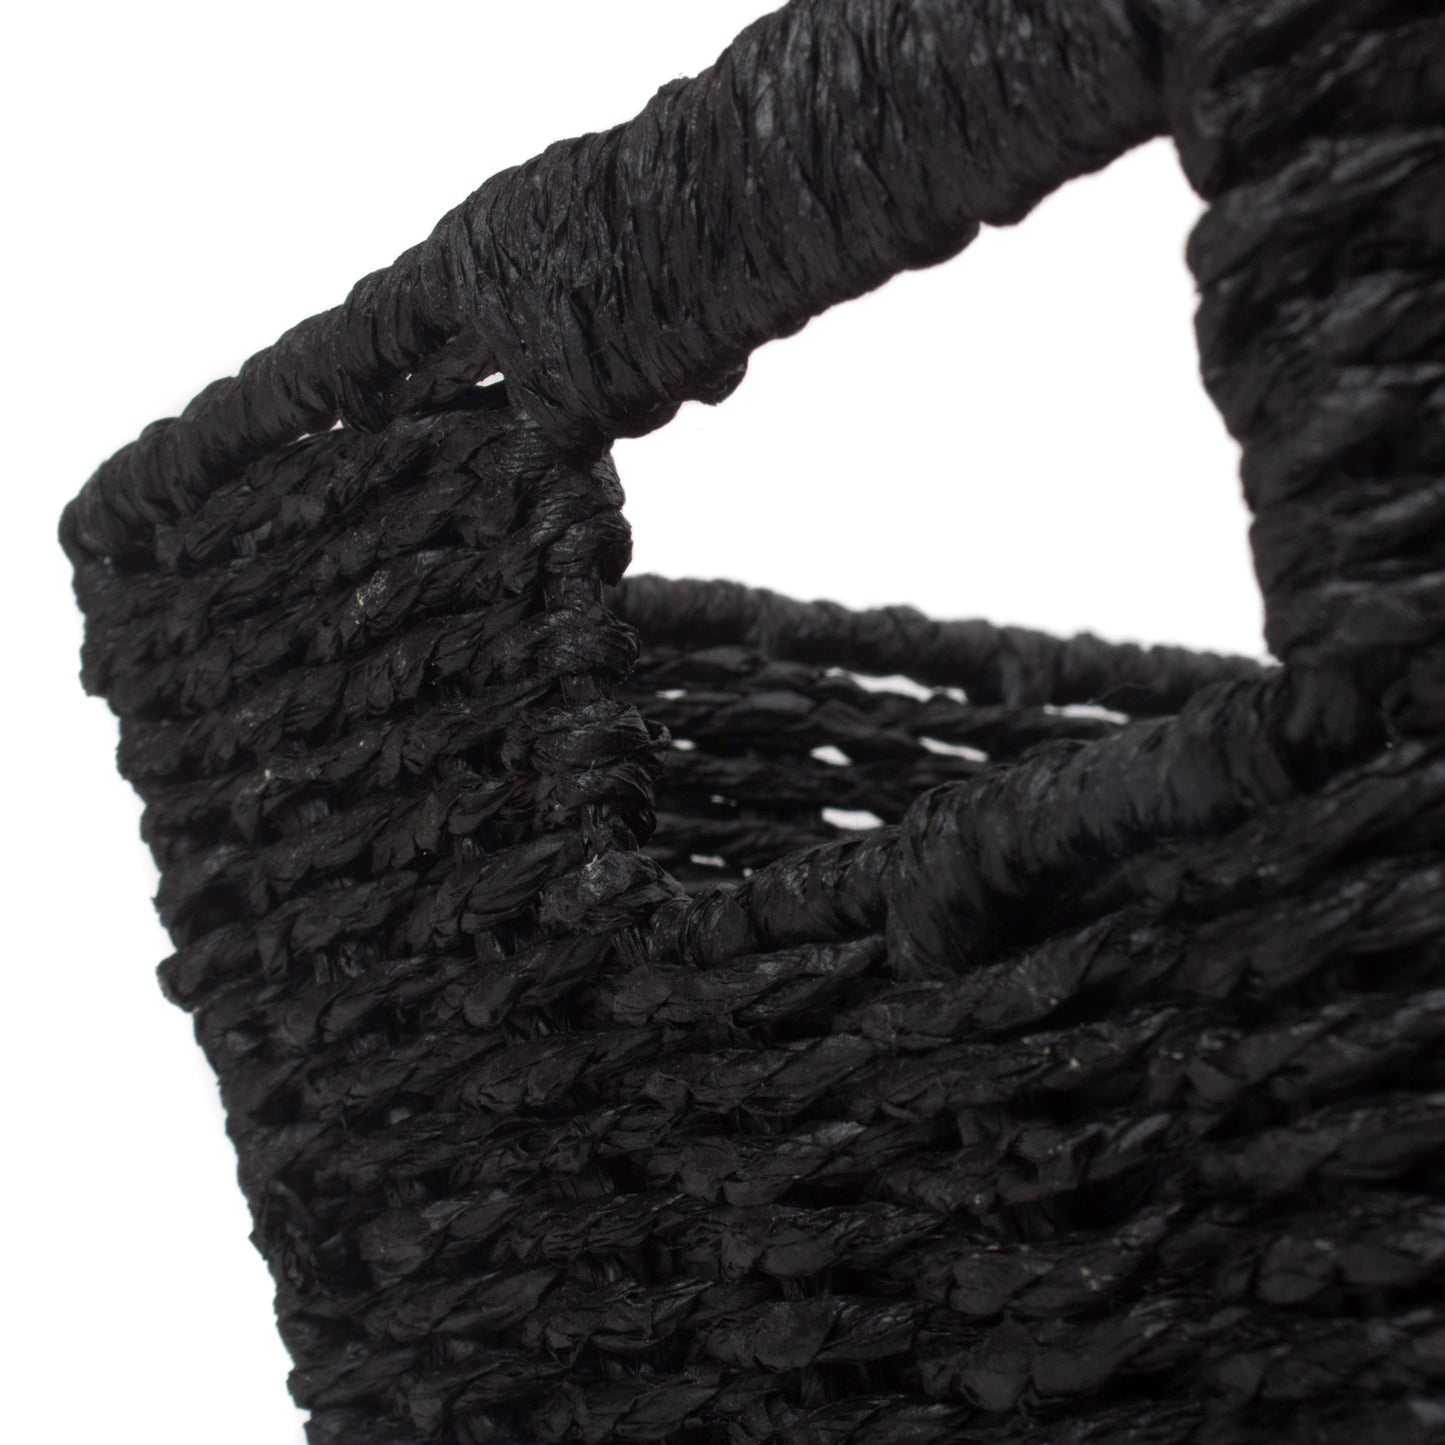 Deep Black Paper Rope Tray - Small